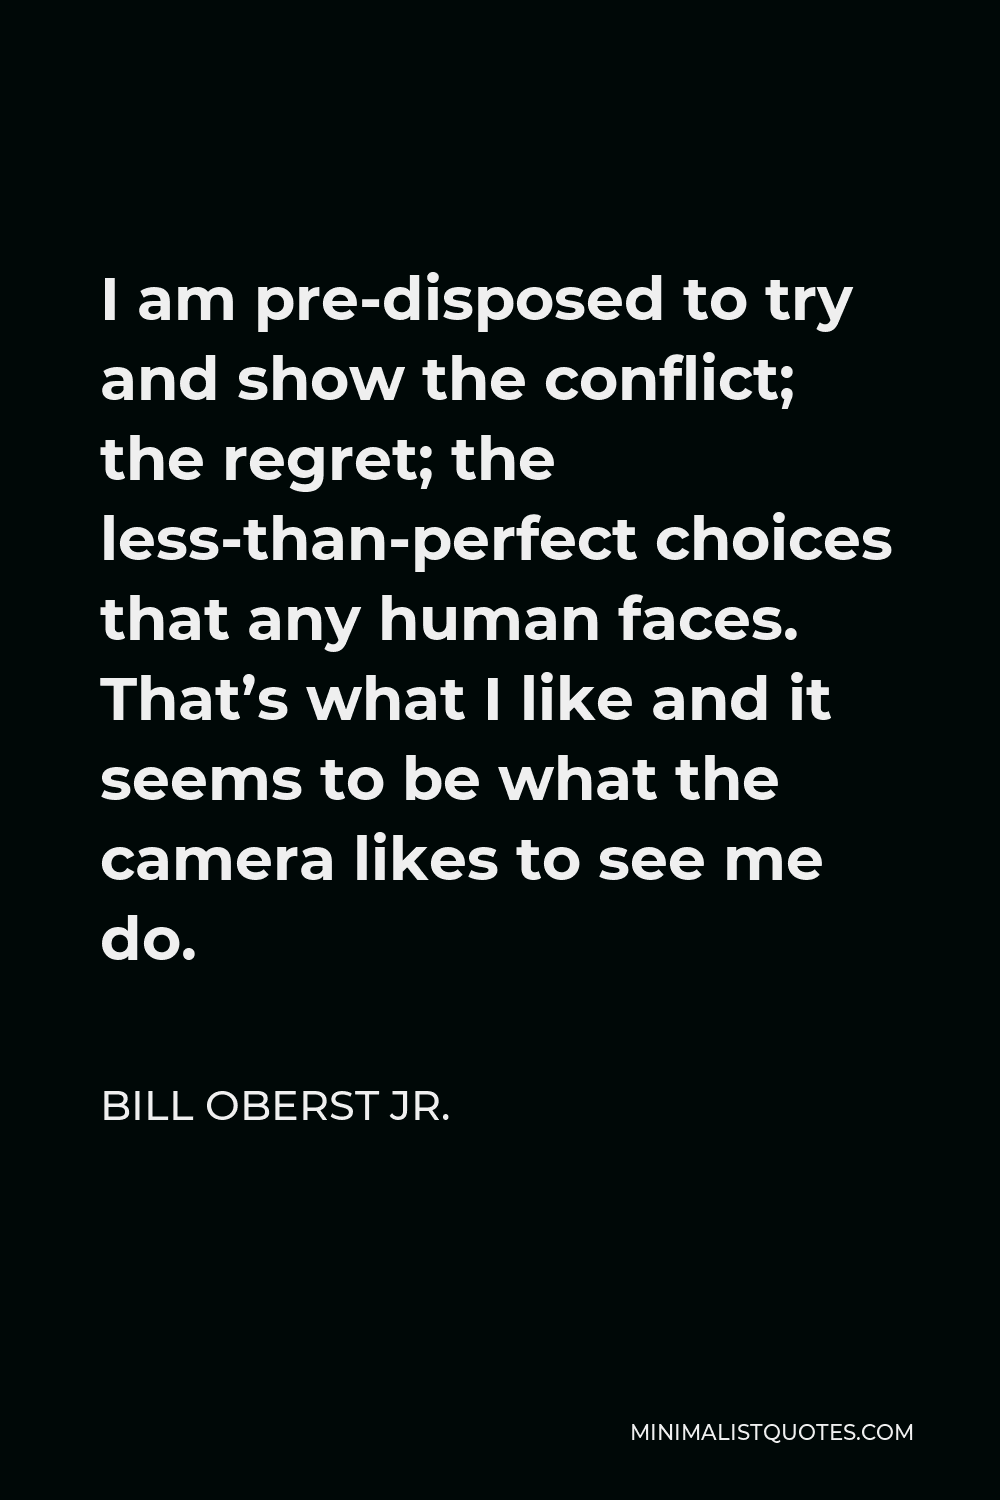 Bill Oberst Jr. Quote - I am pre-disposed to try and show the conflict; the regret; the less-than-perfect choices that any human faces. That’s what I like and it seems to be what the camera likes to see me do.